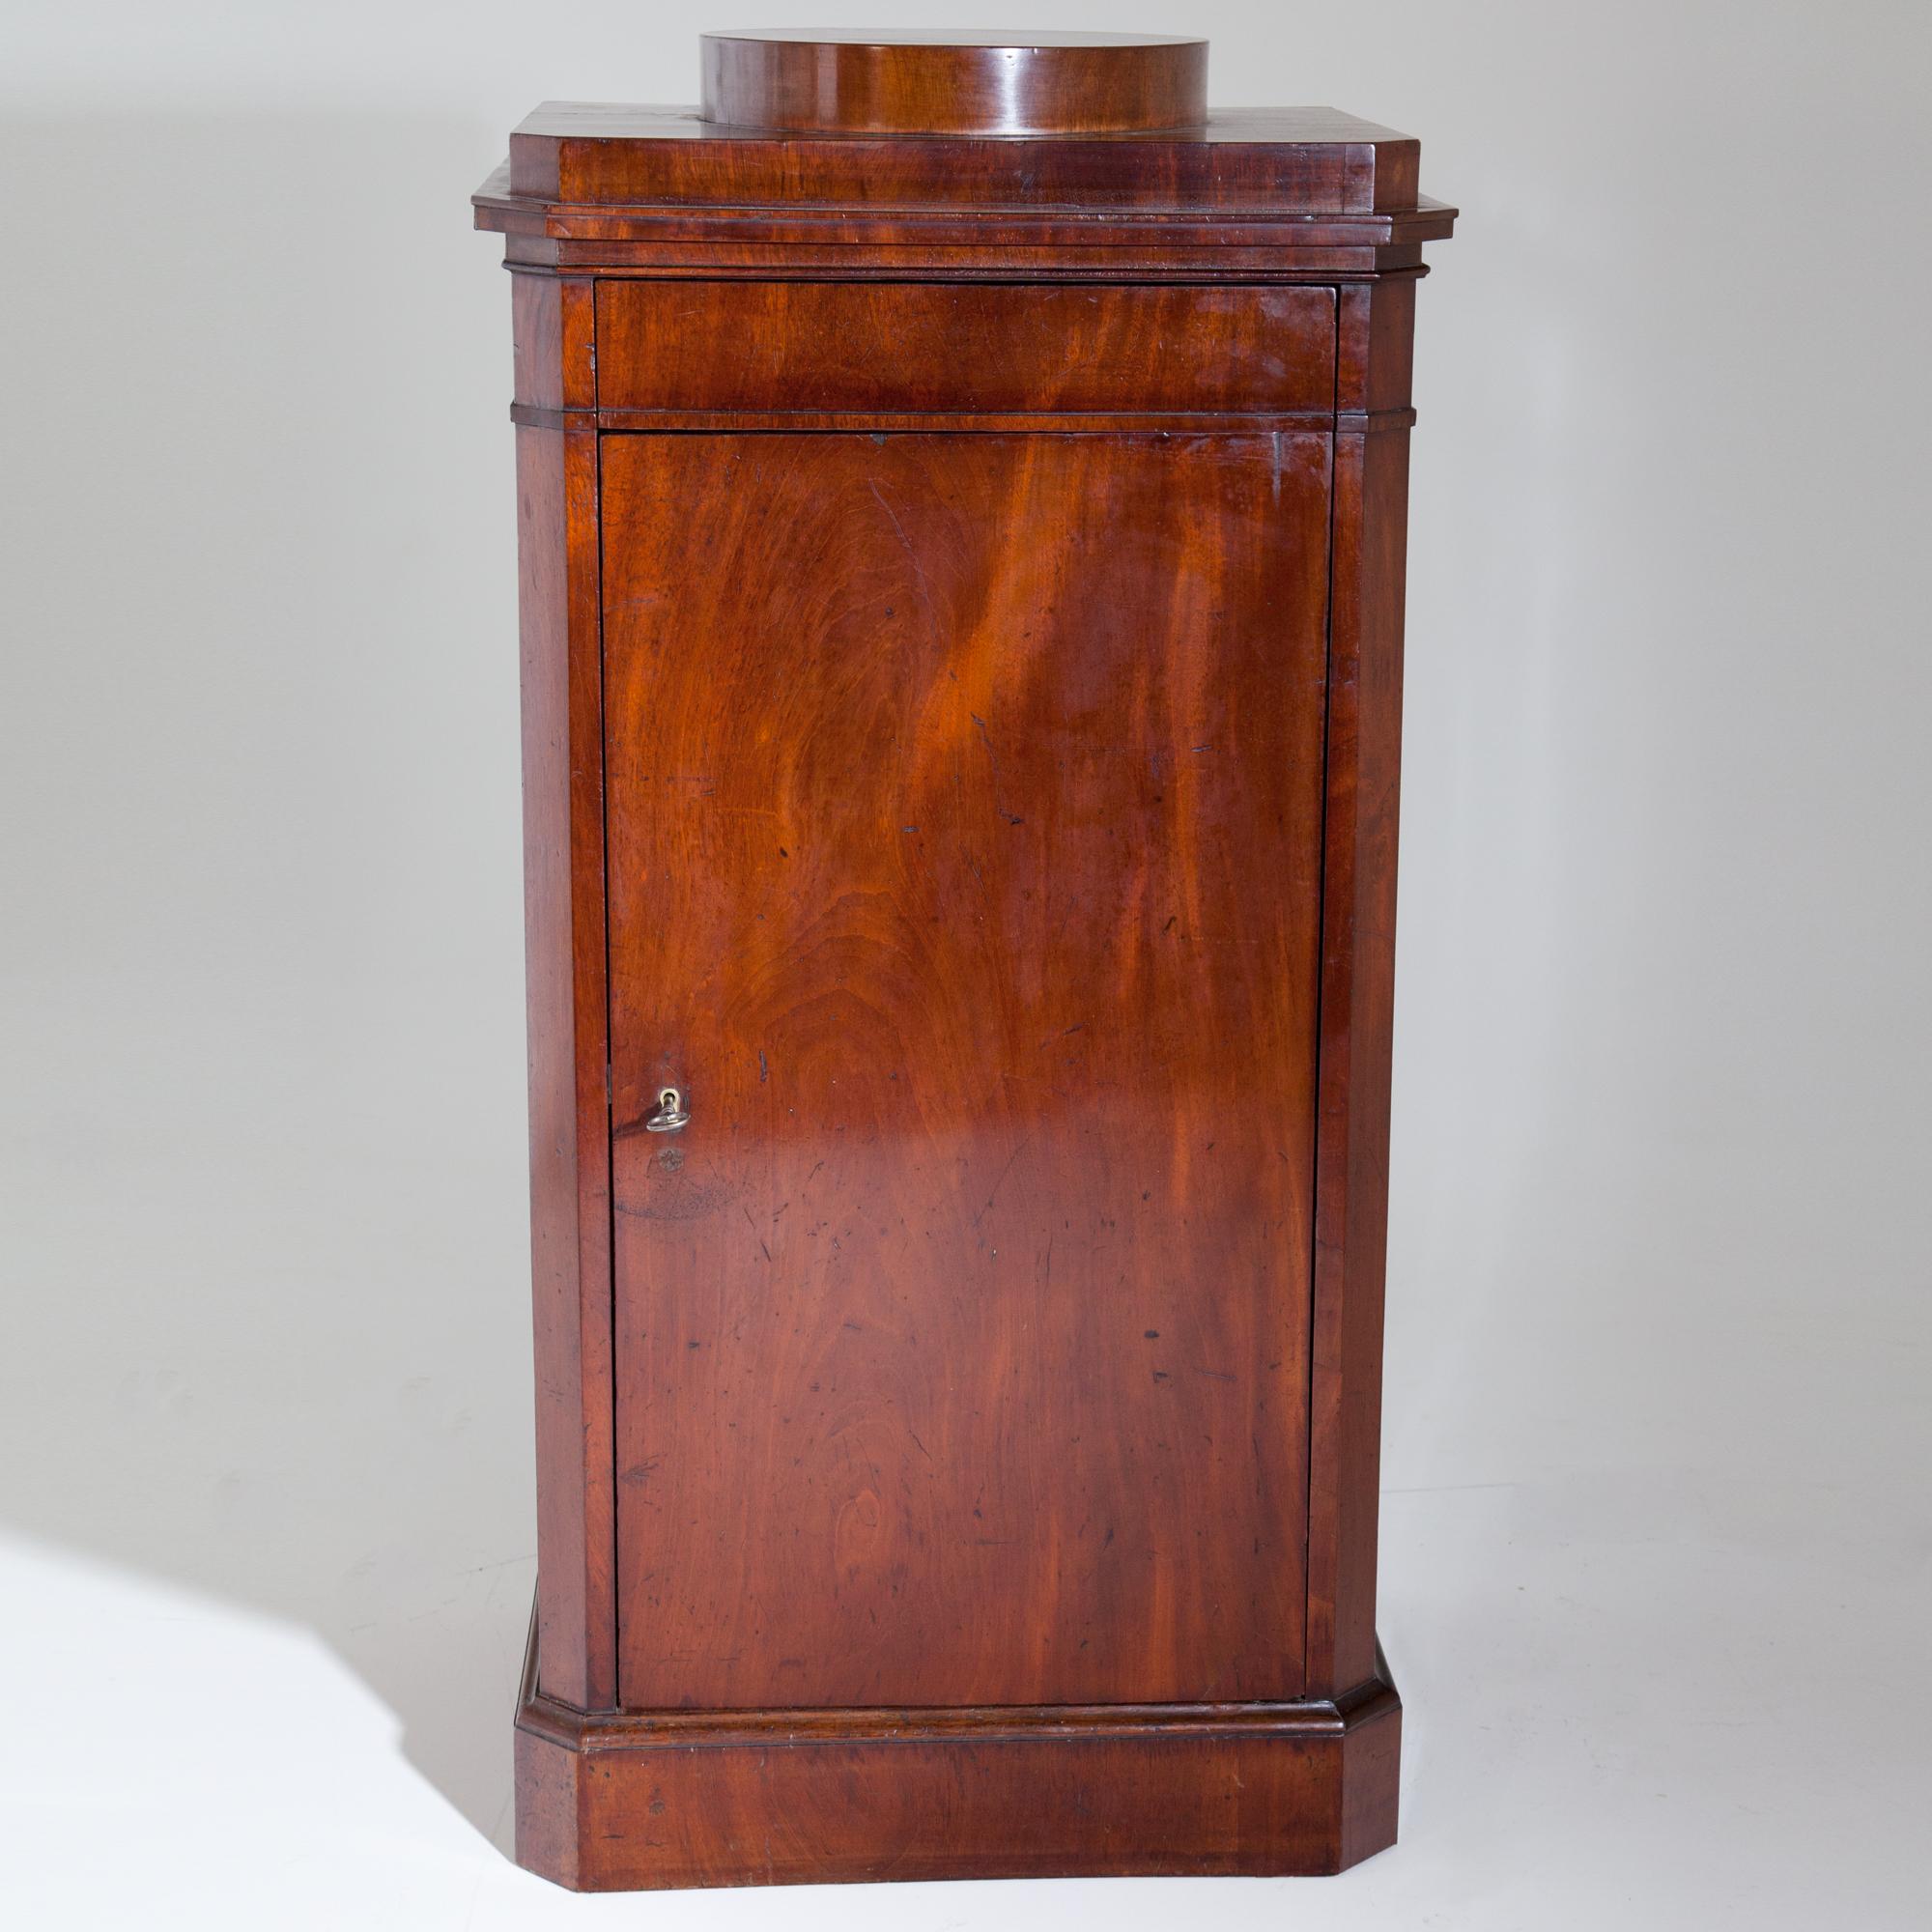 Single-door mahogany pedestal with light base and beveled corners. Shelf with round platform (6 x Ø34 cm). The interior layout consists of three shelves.